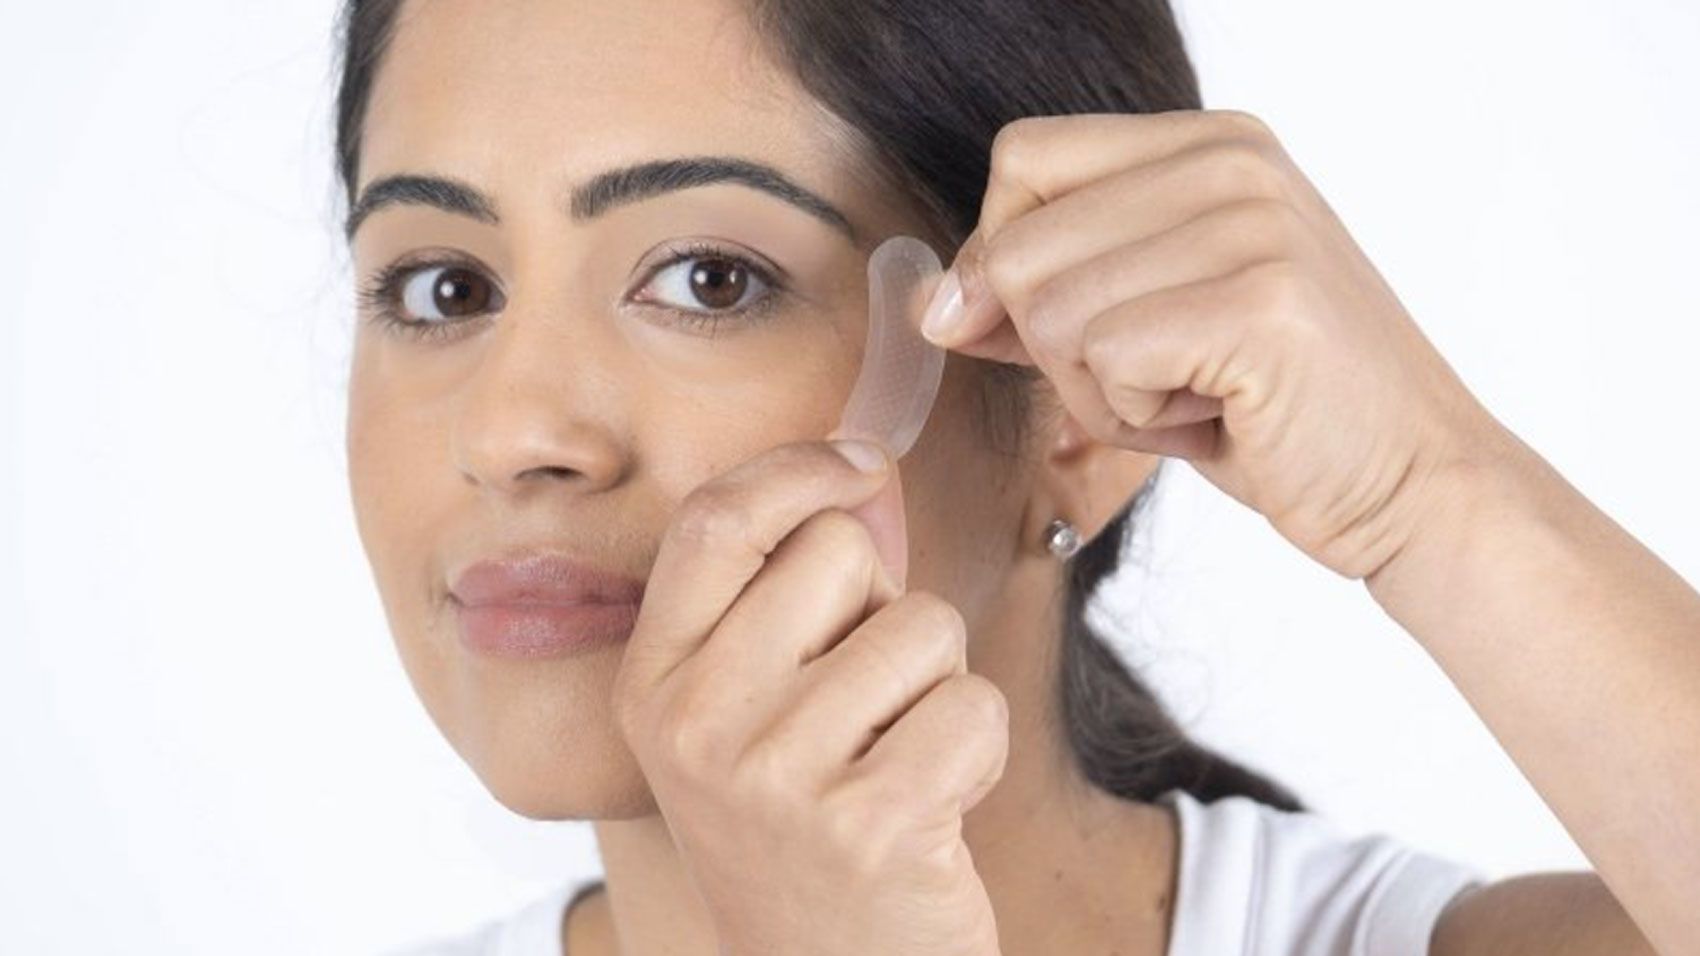 Wrinkle patch Botox this review: more Underscored alternative care Learn about | CNN skin